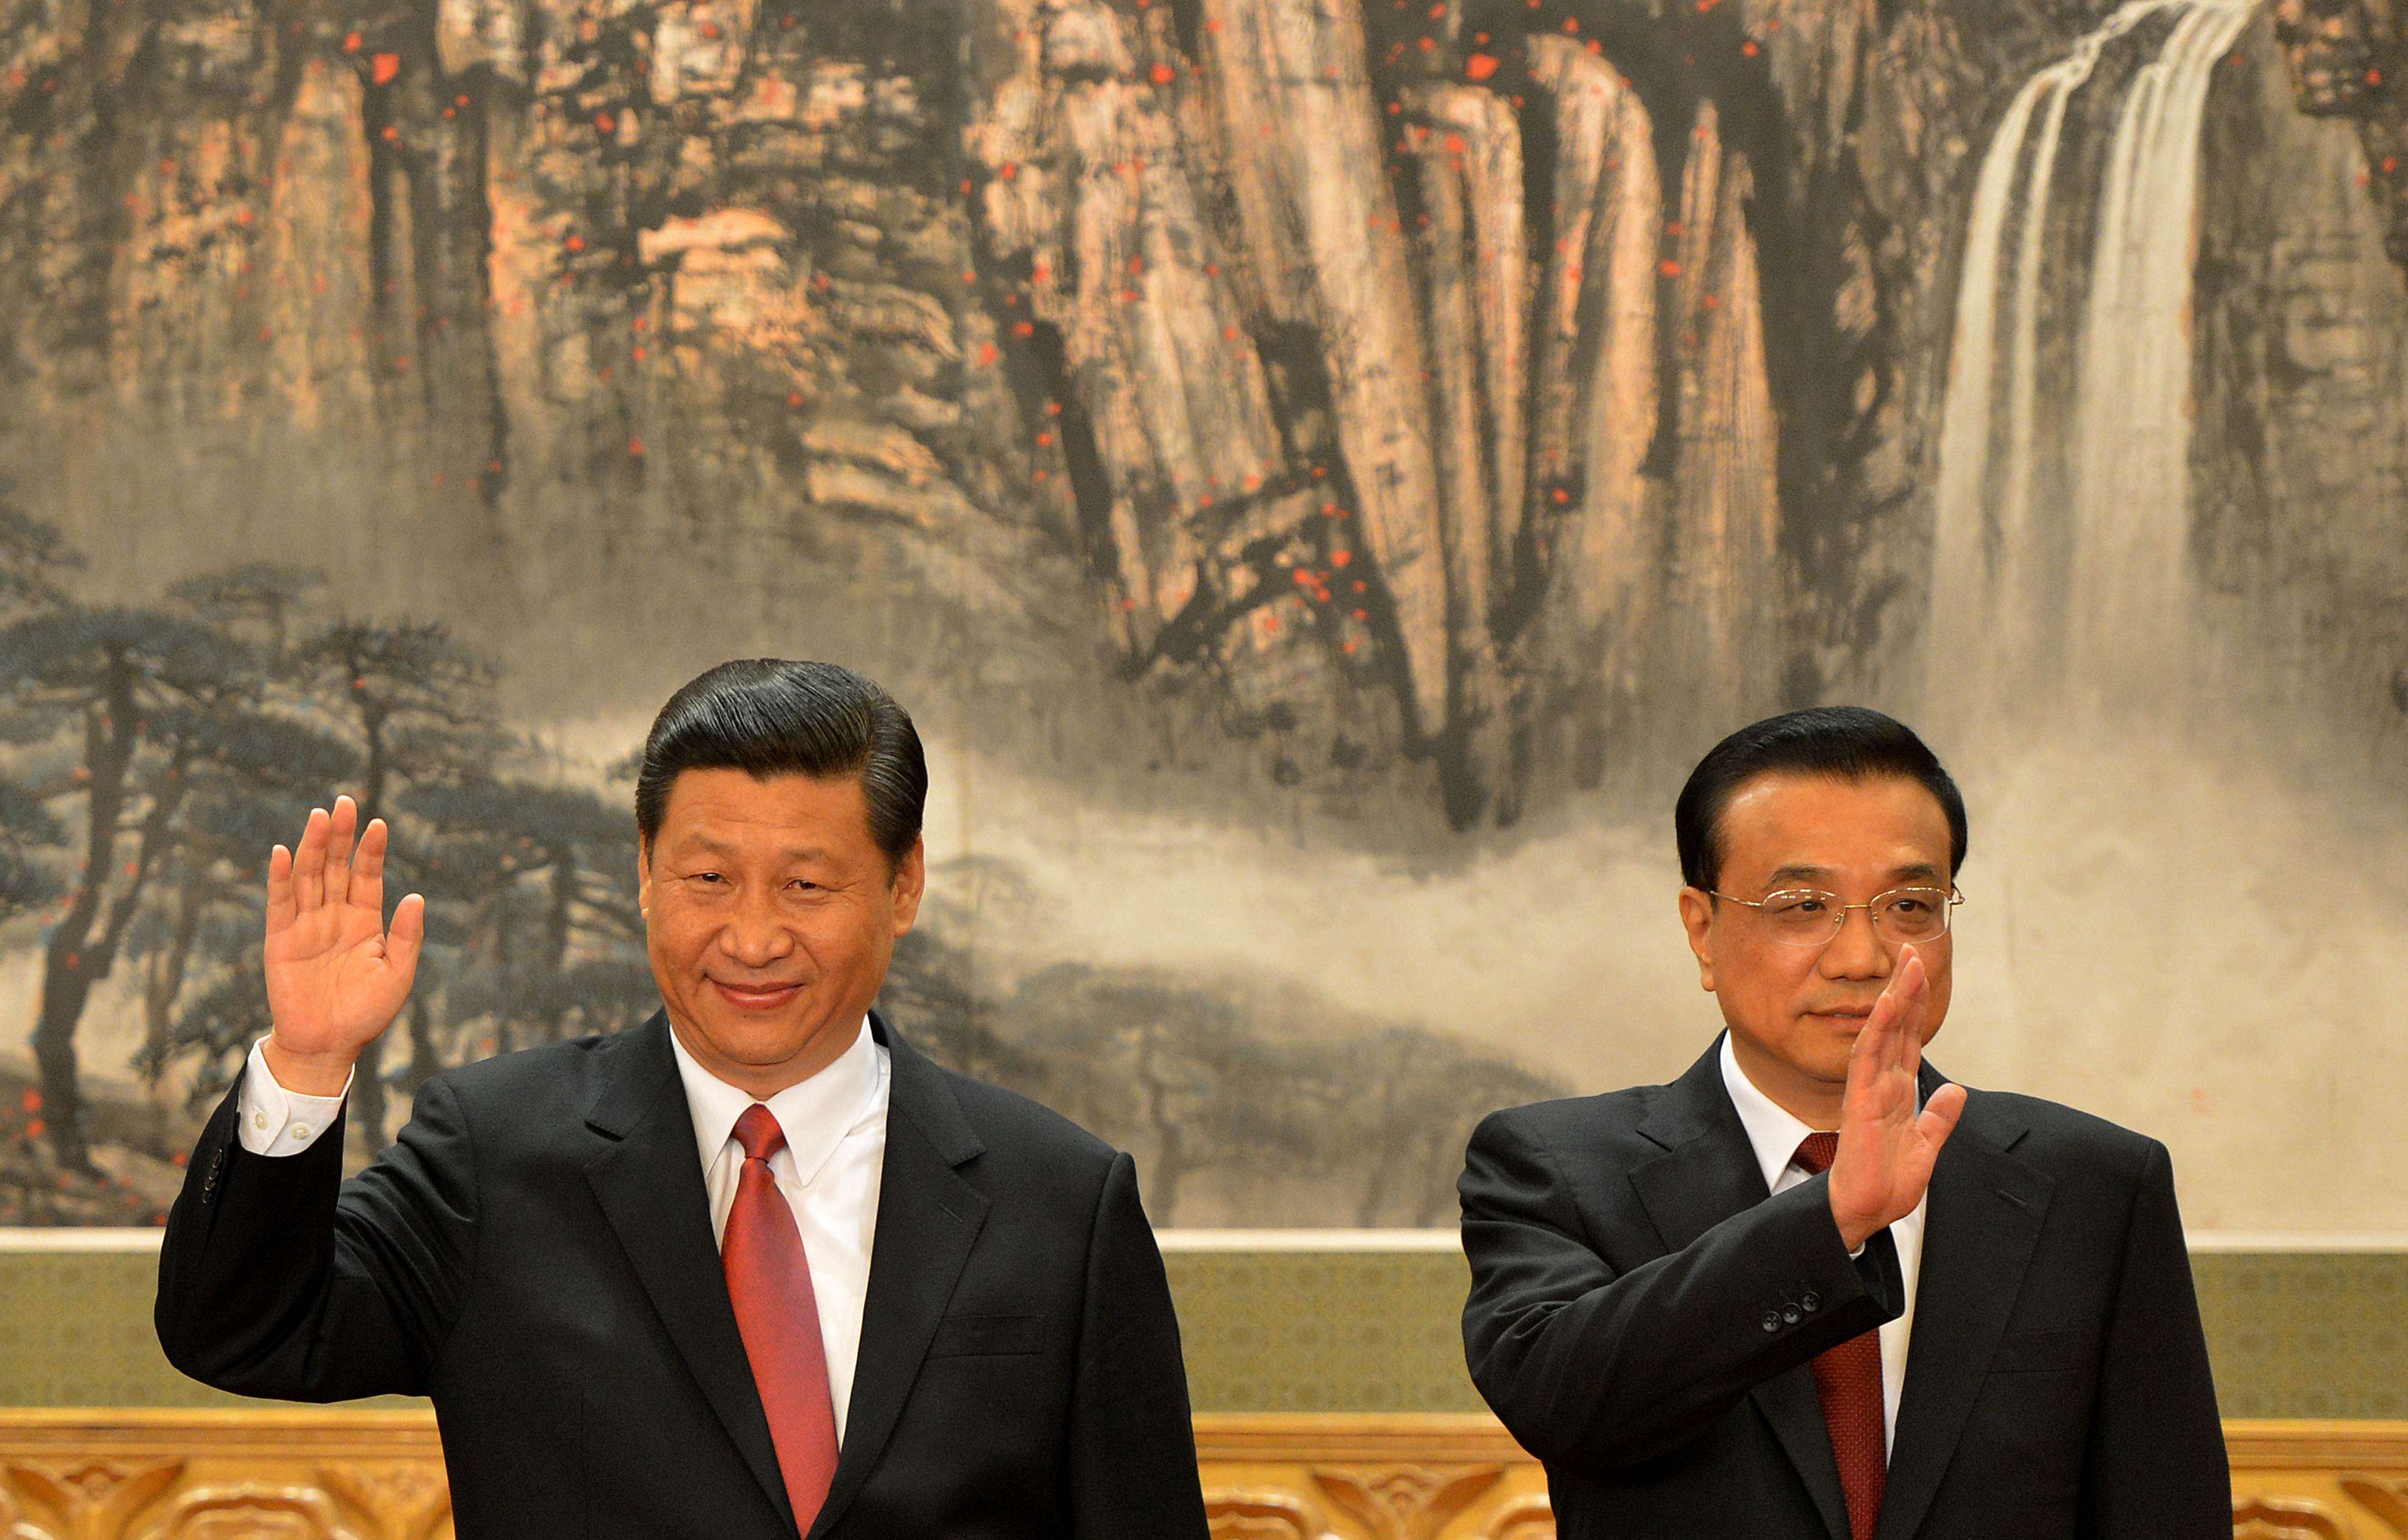 President Xi Jinping (left), with Premier Li Keqiang, has waged a successful fight against corruption in that SOE managers’ conspicuous consumption has fallen. Photo: AFP